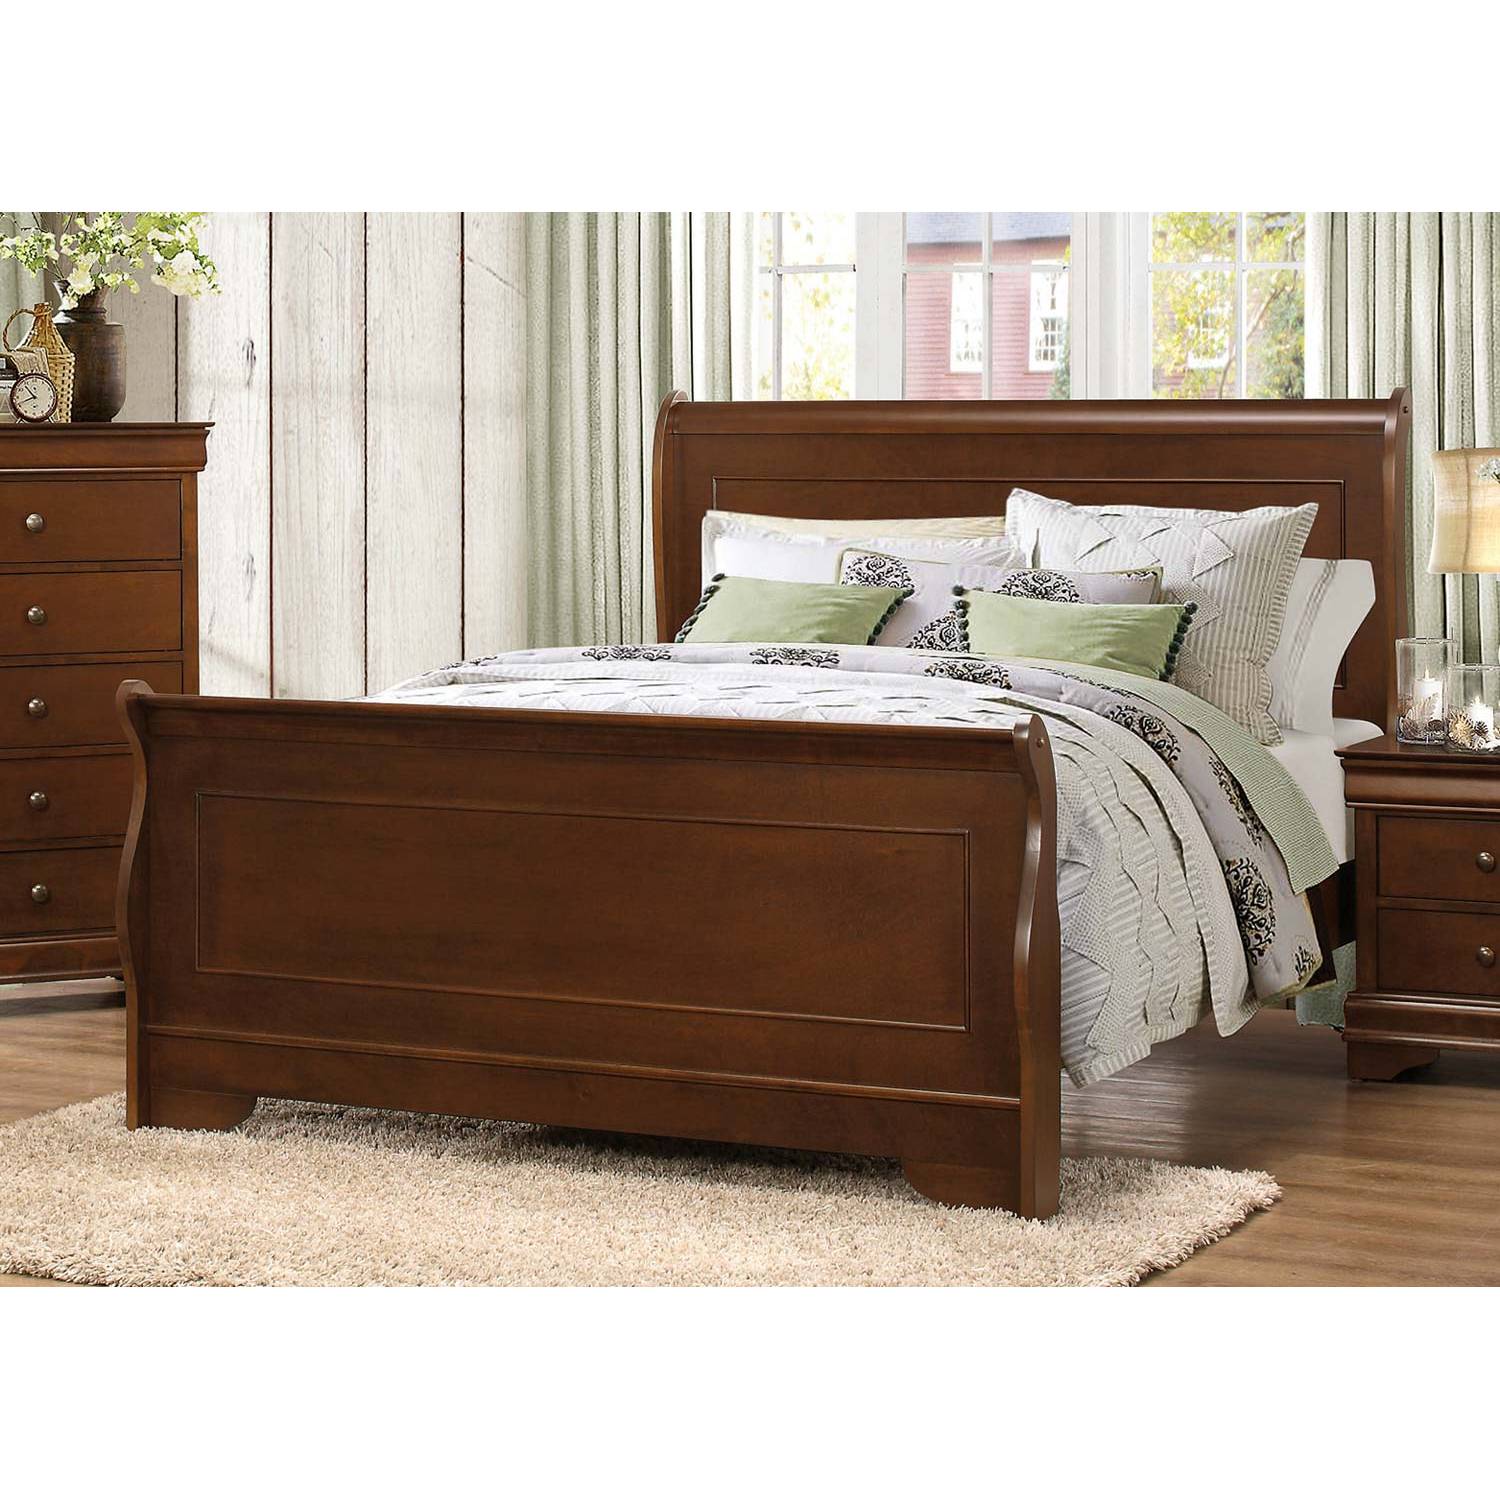 Coaster Louis Philippe 4 Piece Full Sleigh Bedroom Set in Cherry 